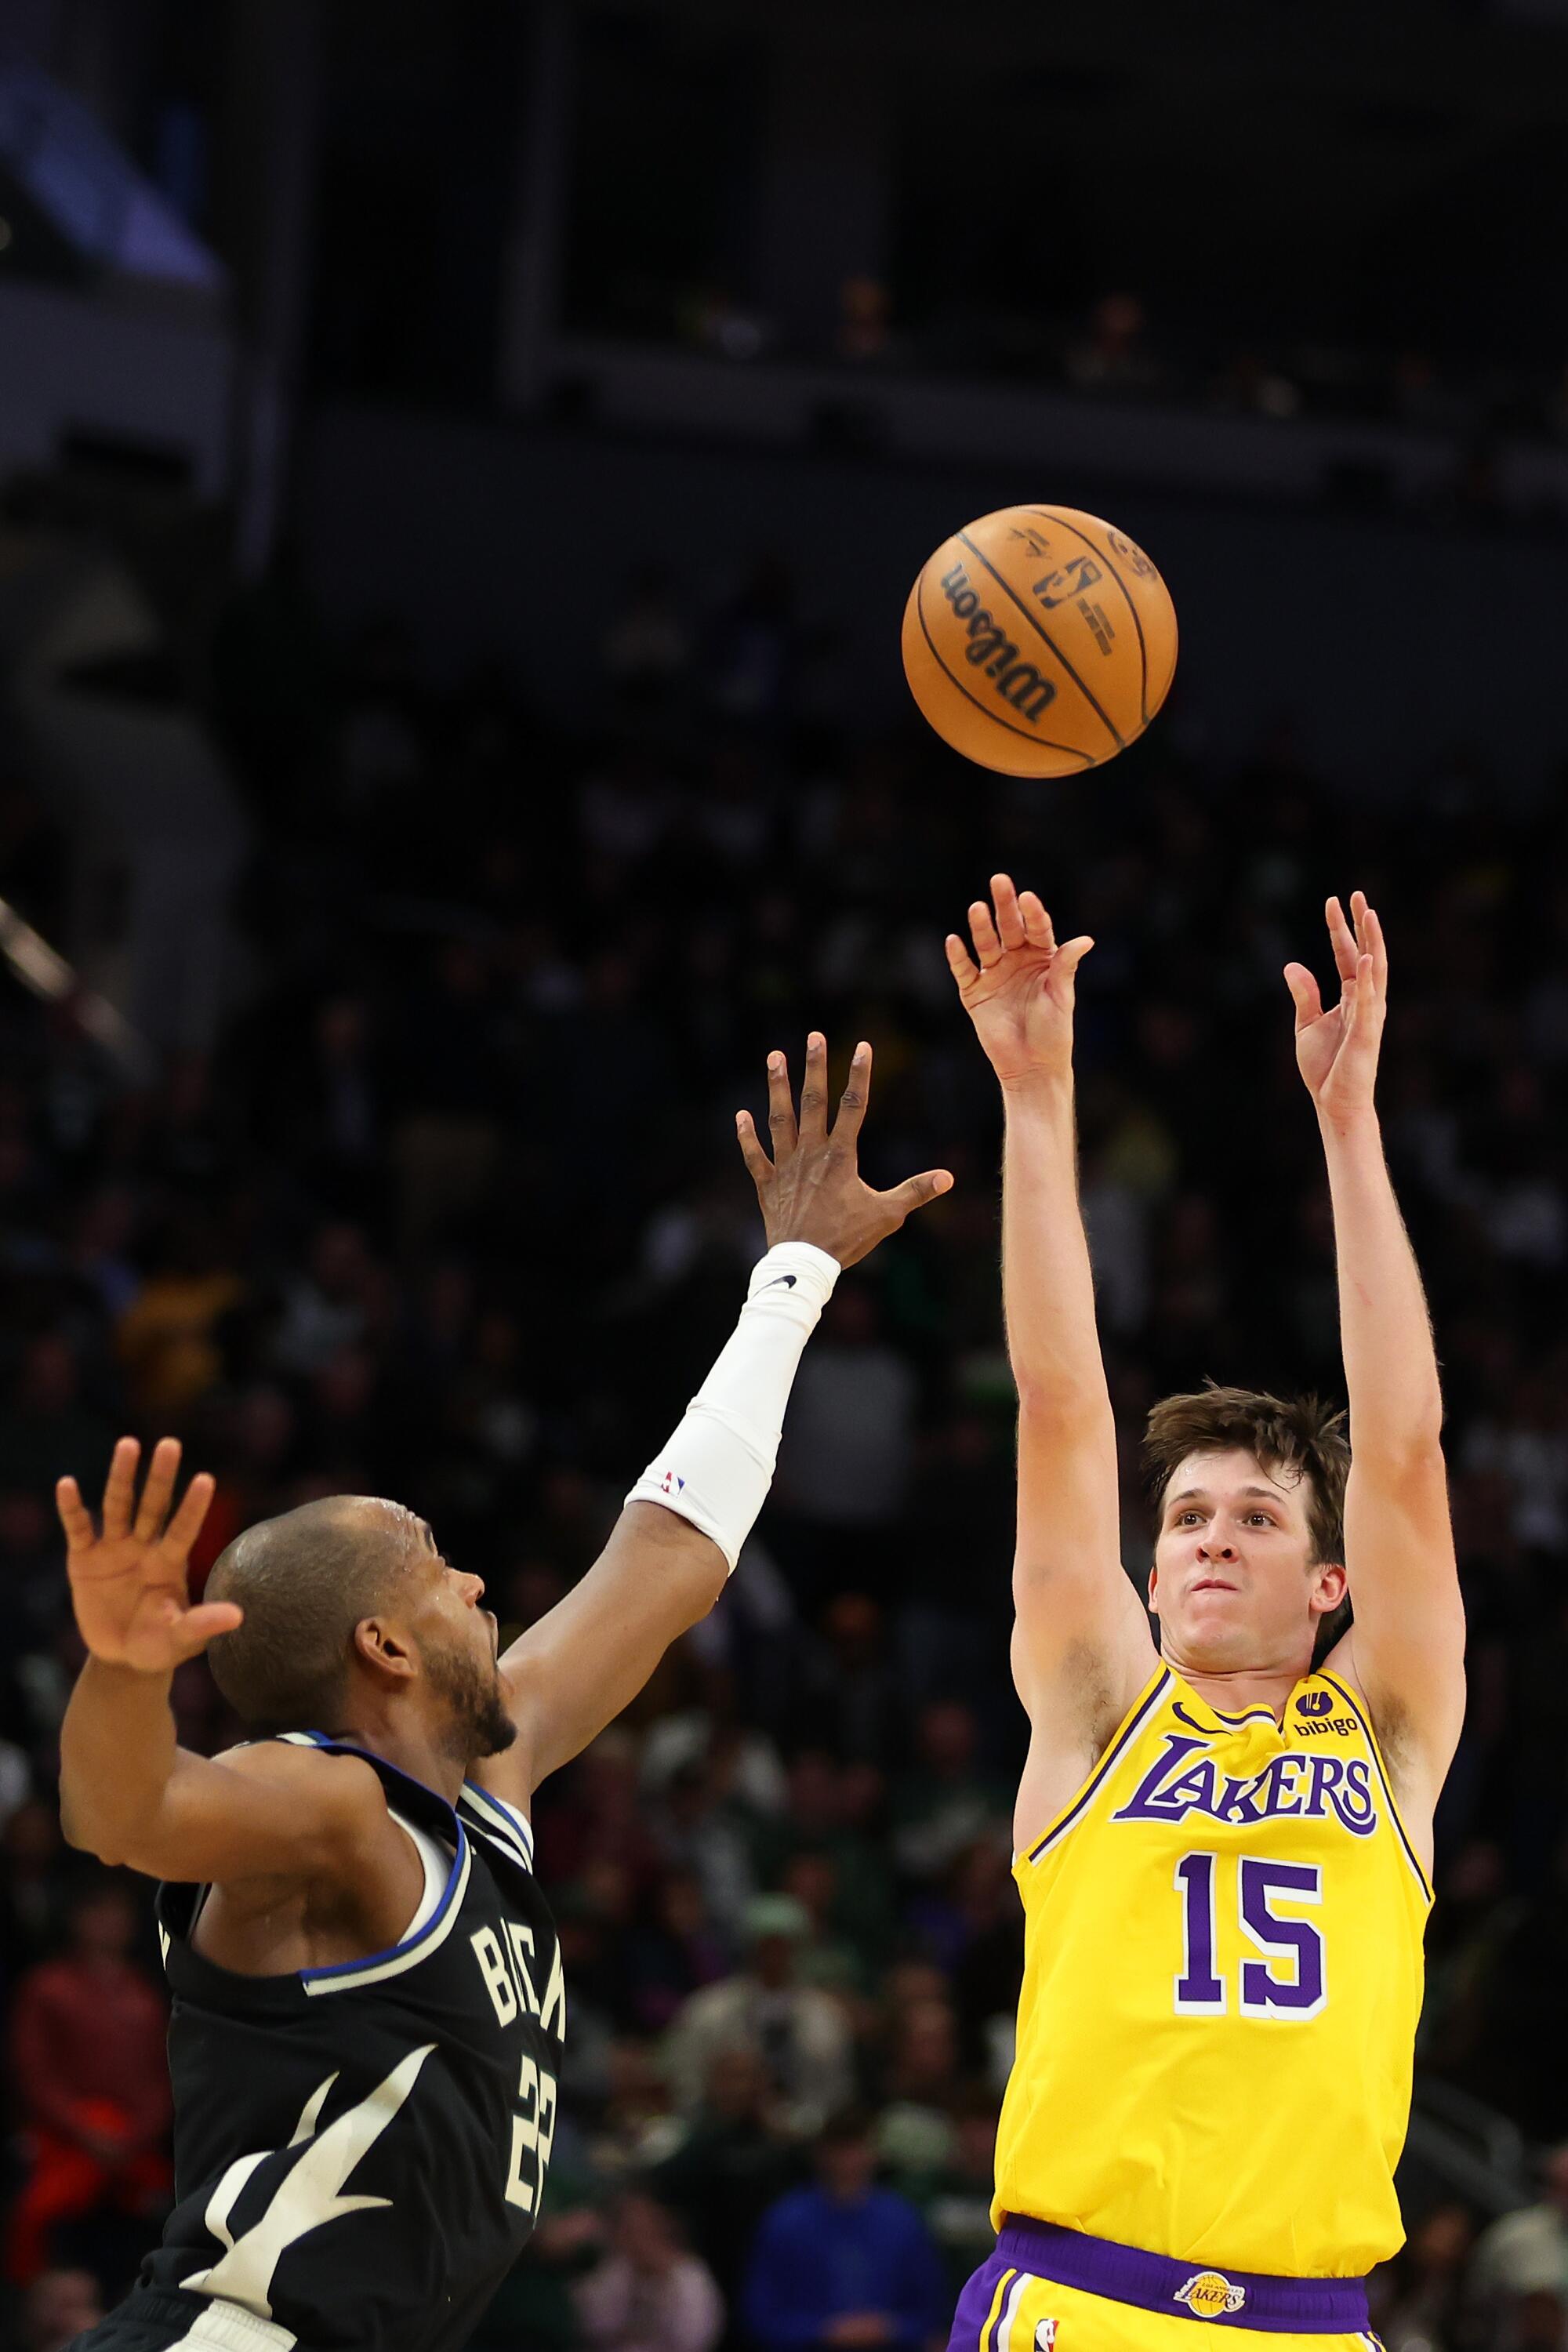 The Lakers' Austin Reaves shoots over the Bucks' Khris Middleton during the second overtime of the Lakers' win